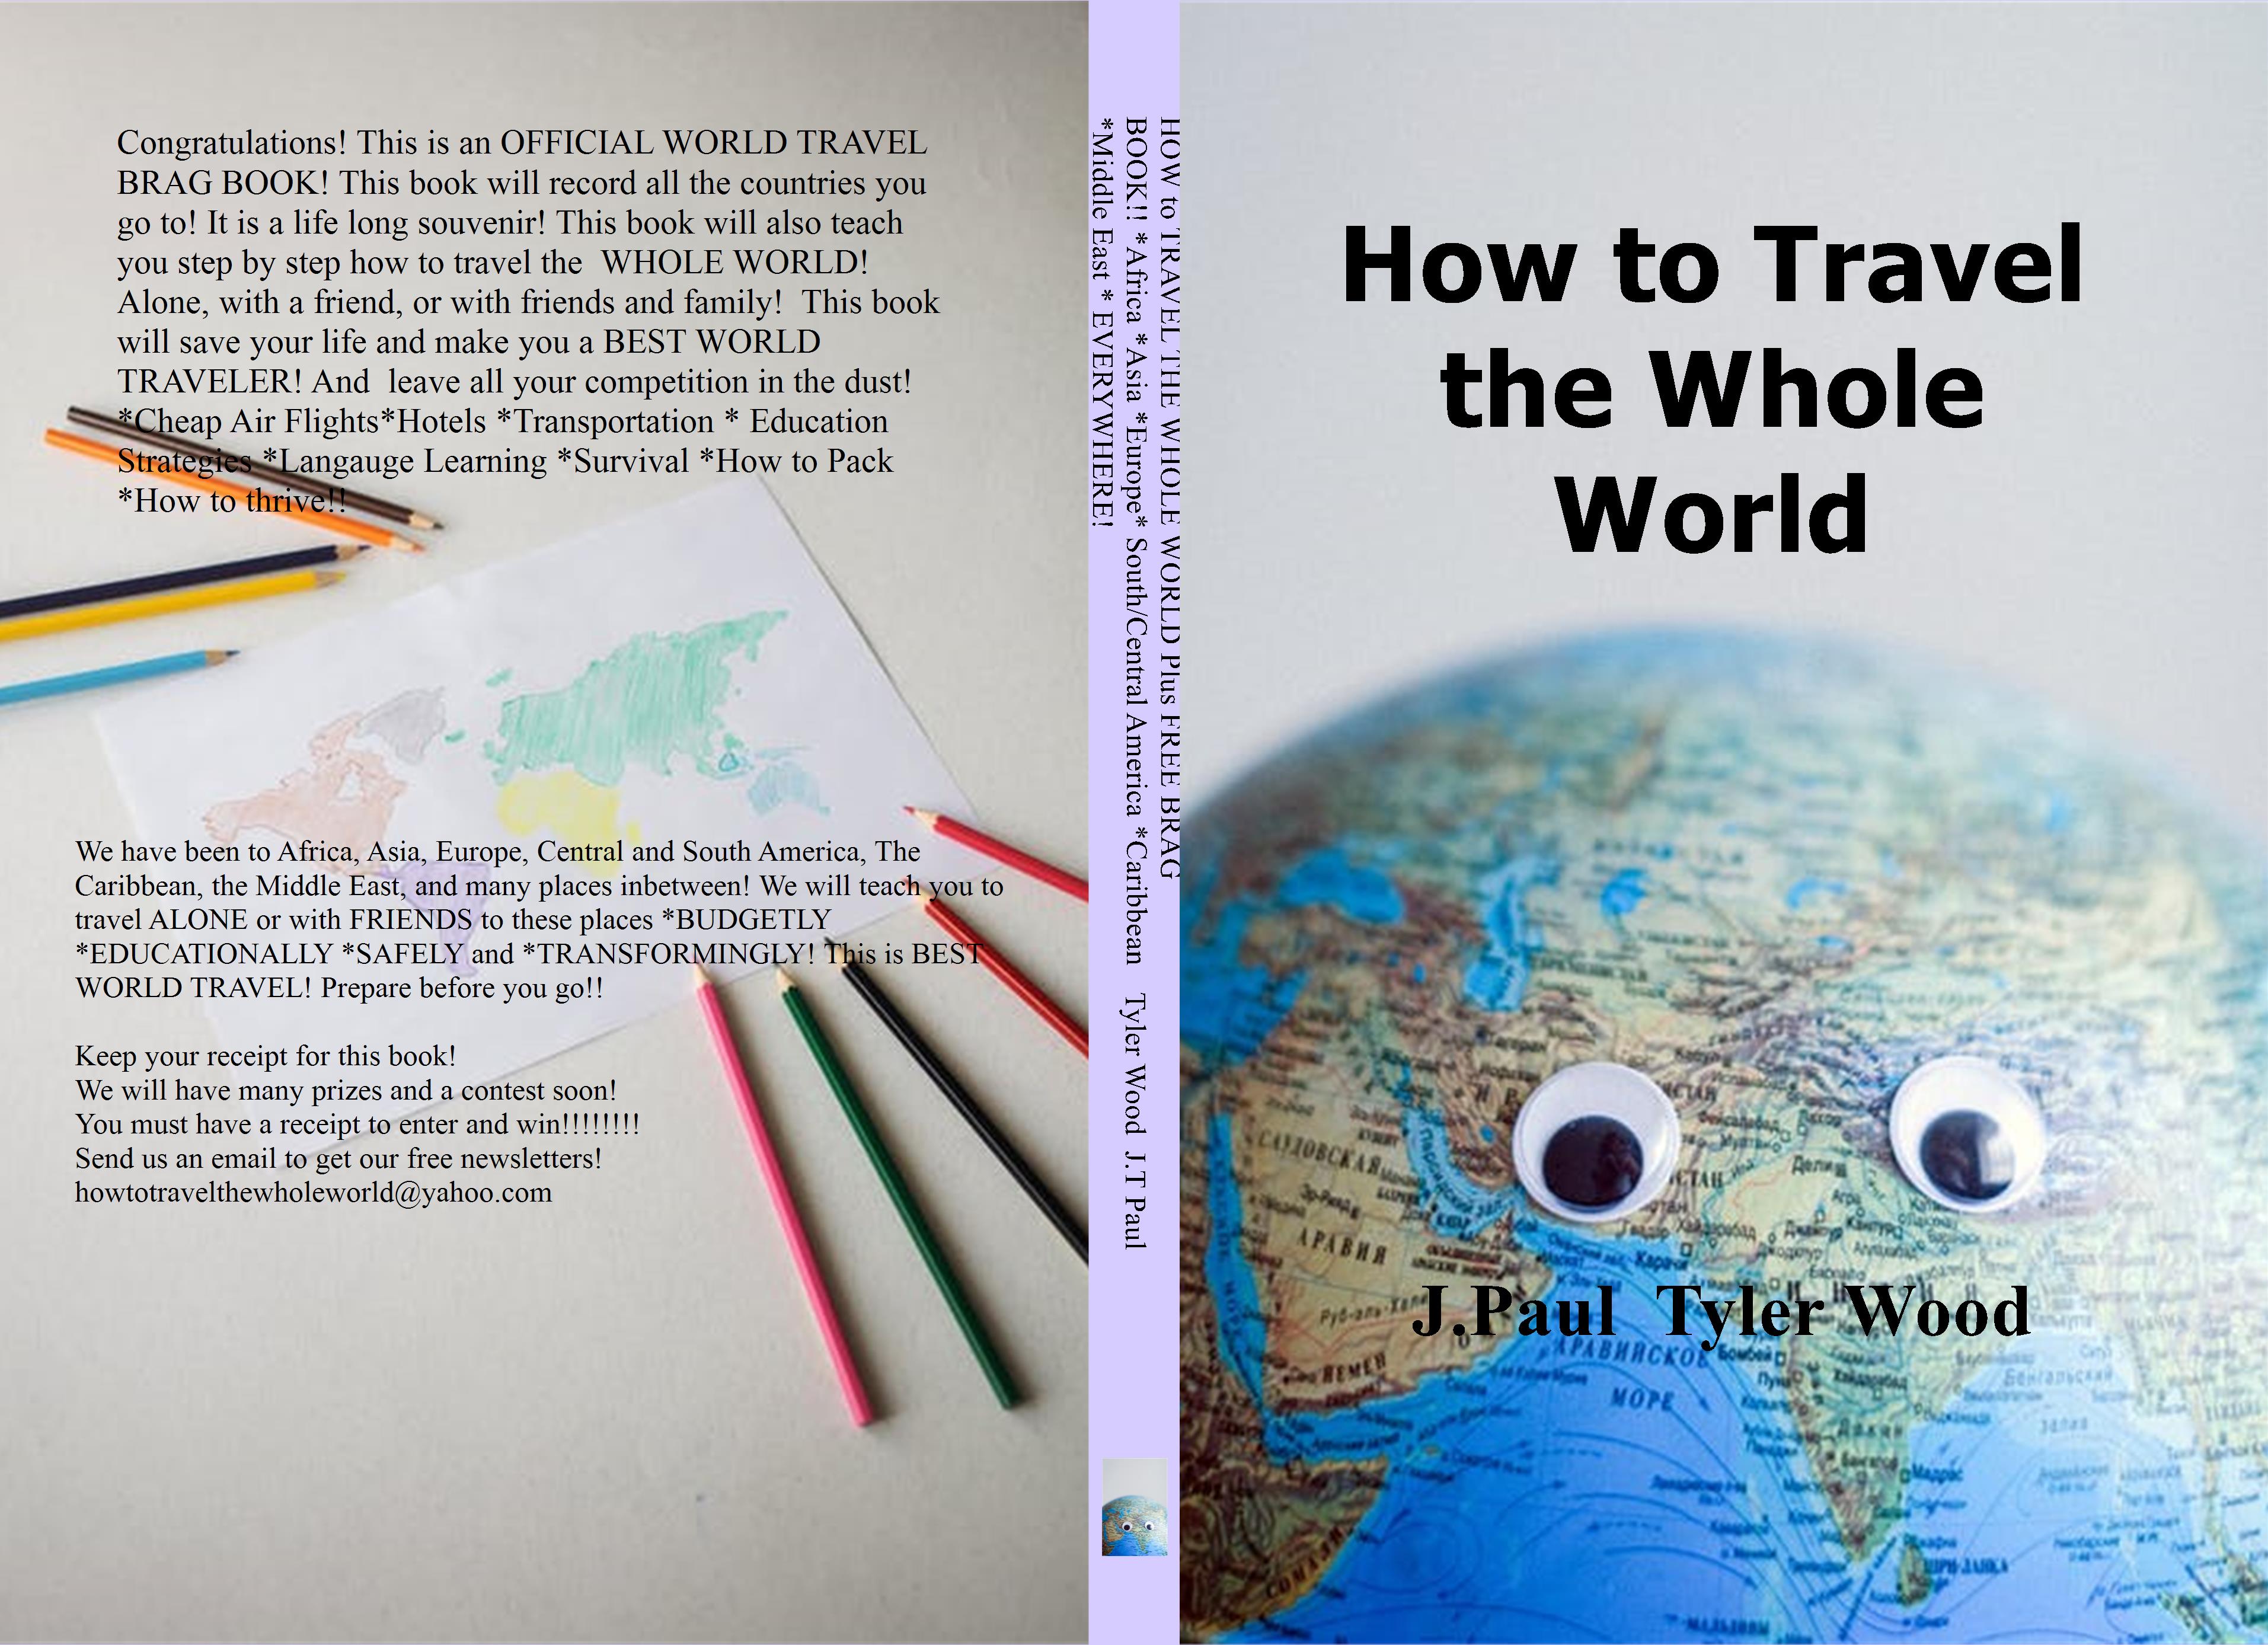 World travel cover image